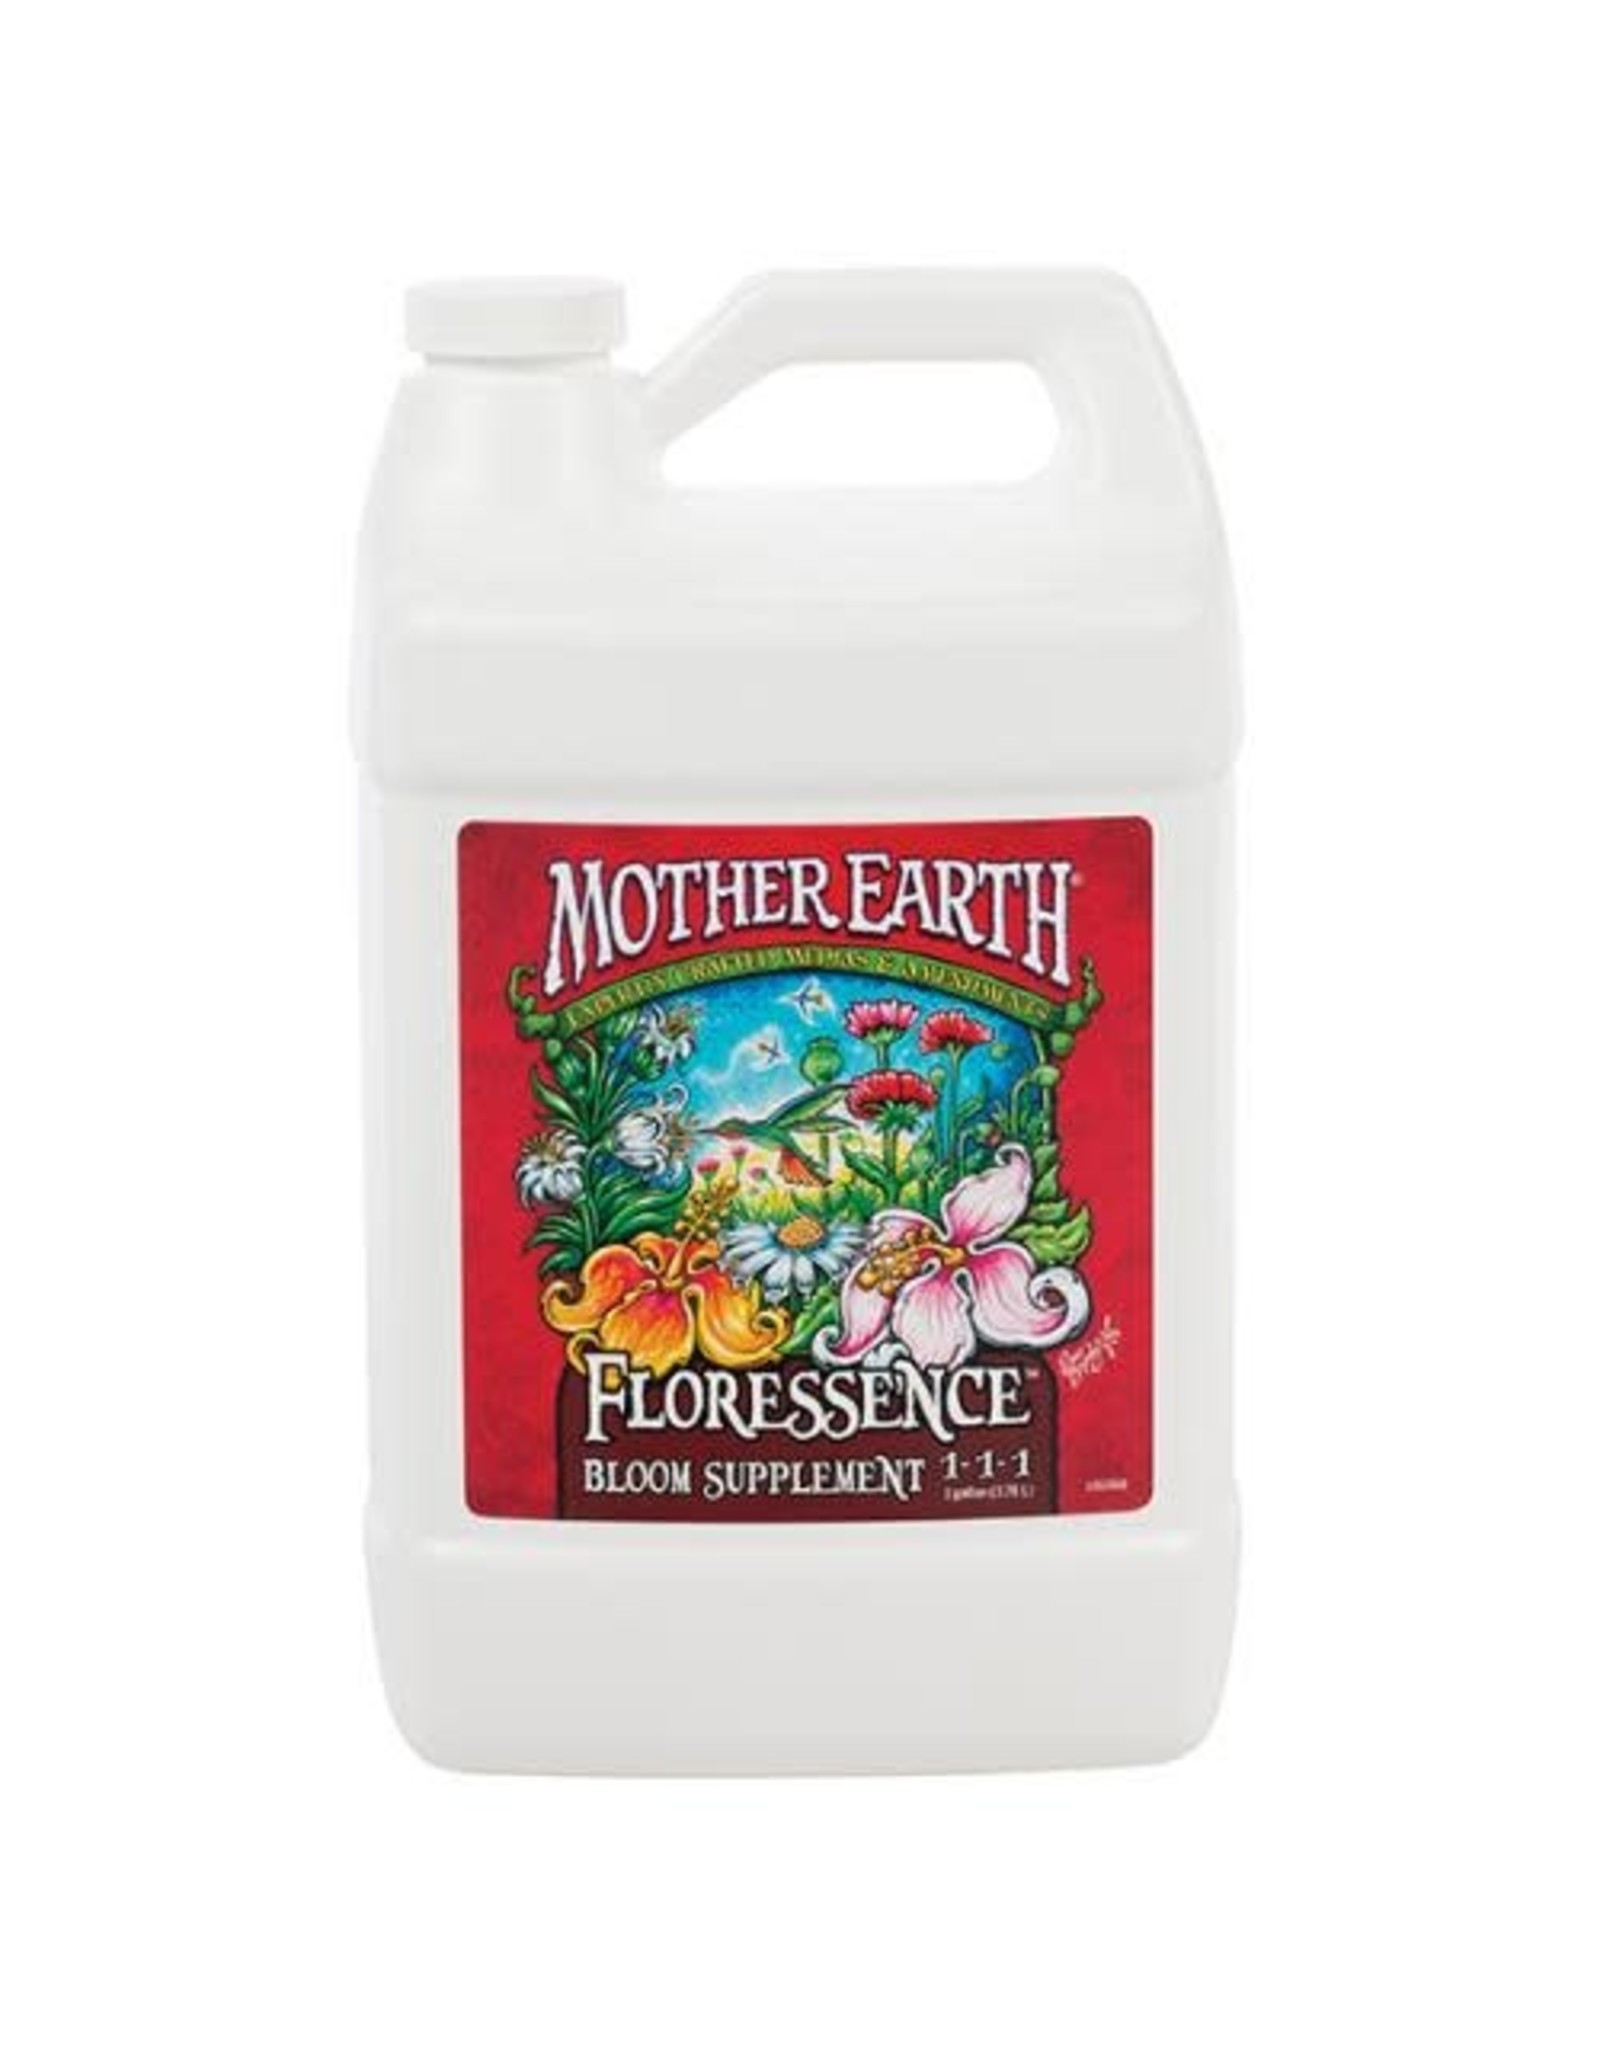 Mother Earth Mother Earth Floressence Bloom Supplement Pint